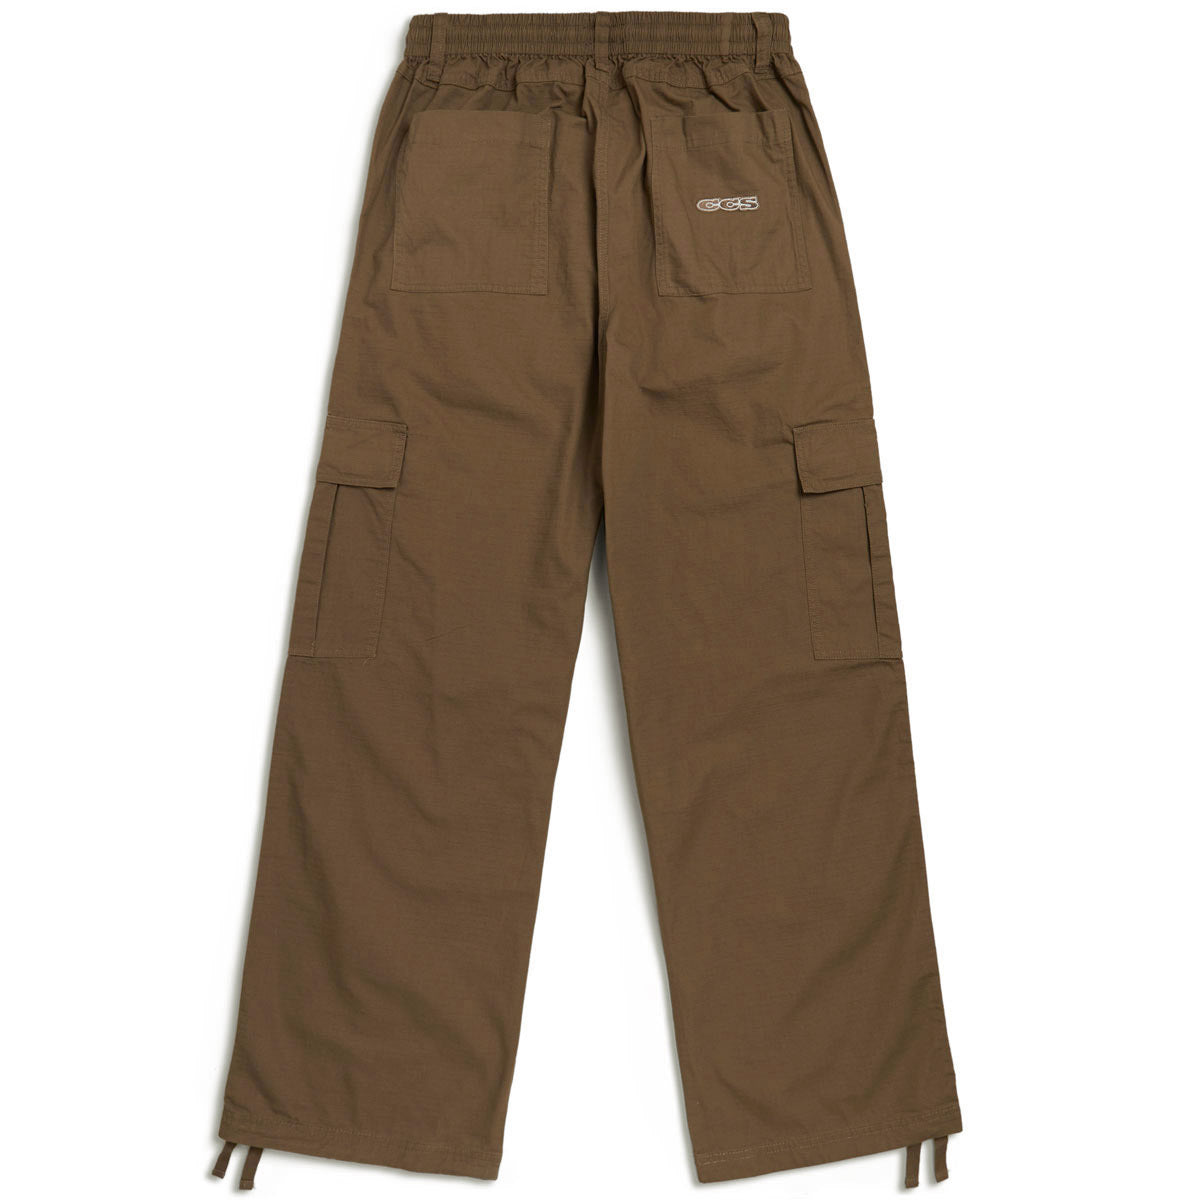 CCS Easy Ripstop Cargo Pants - Brown image 7